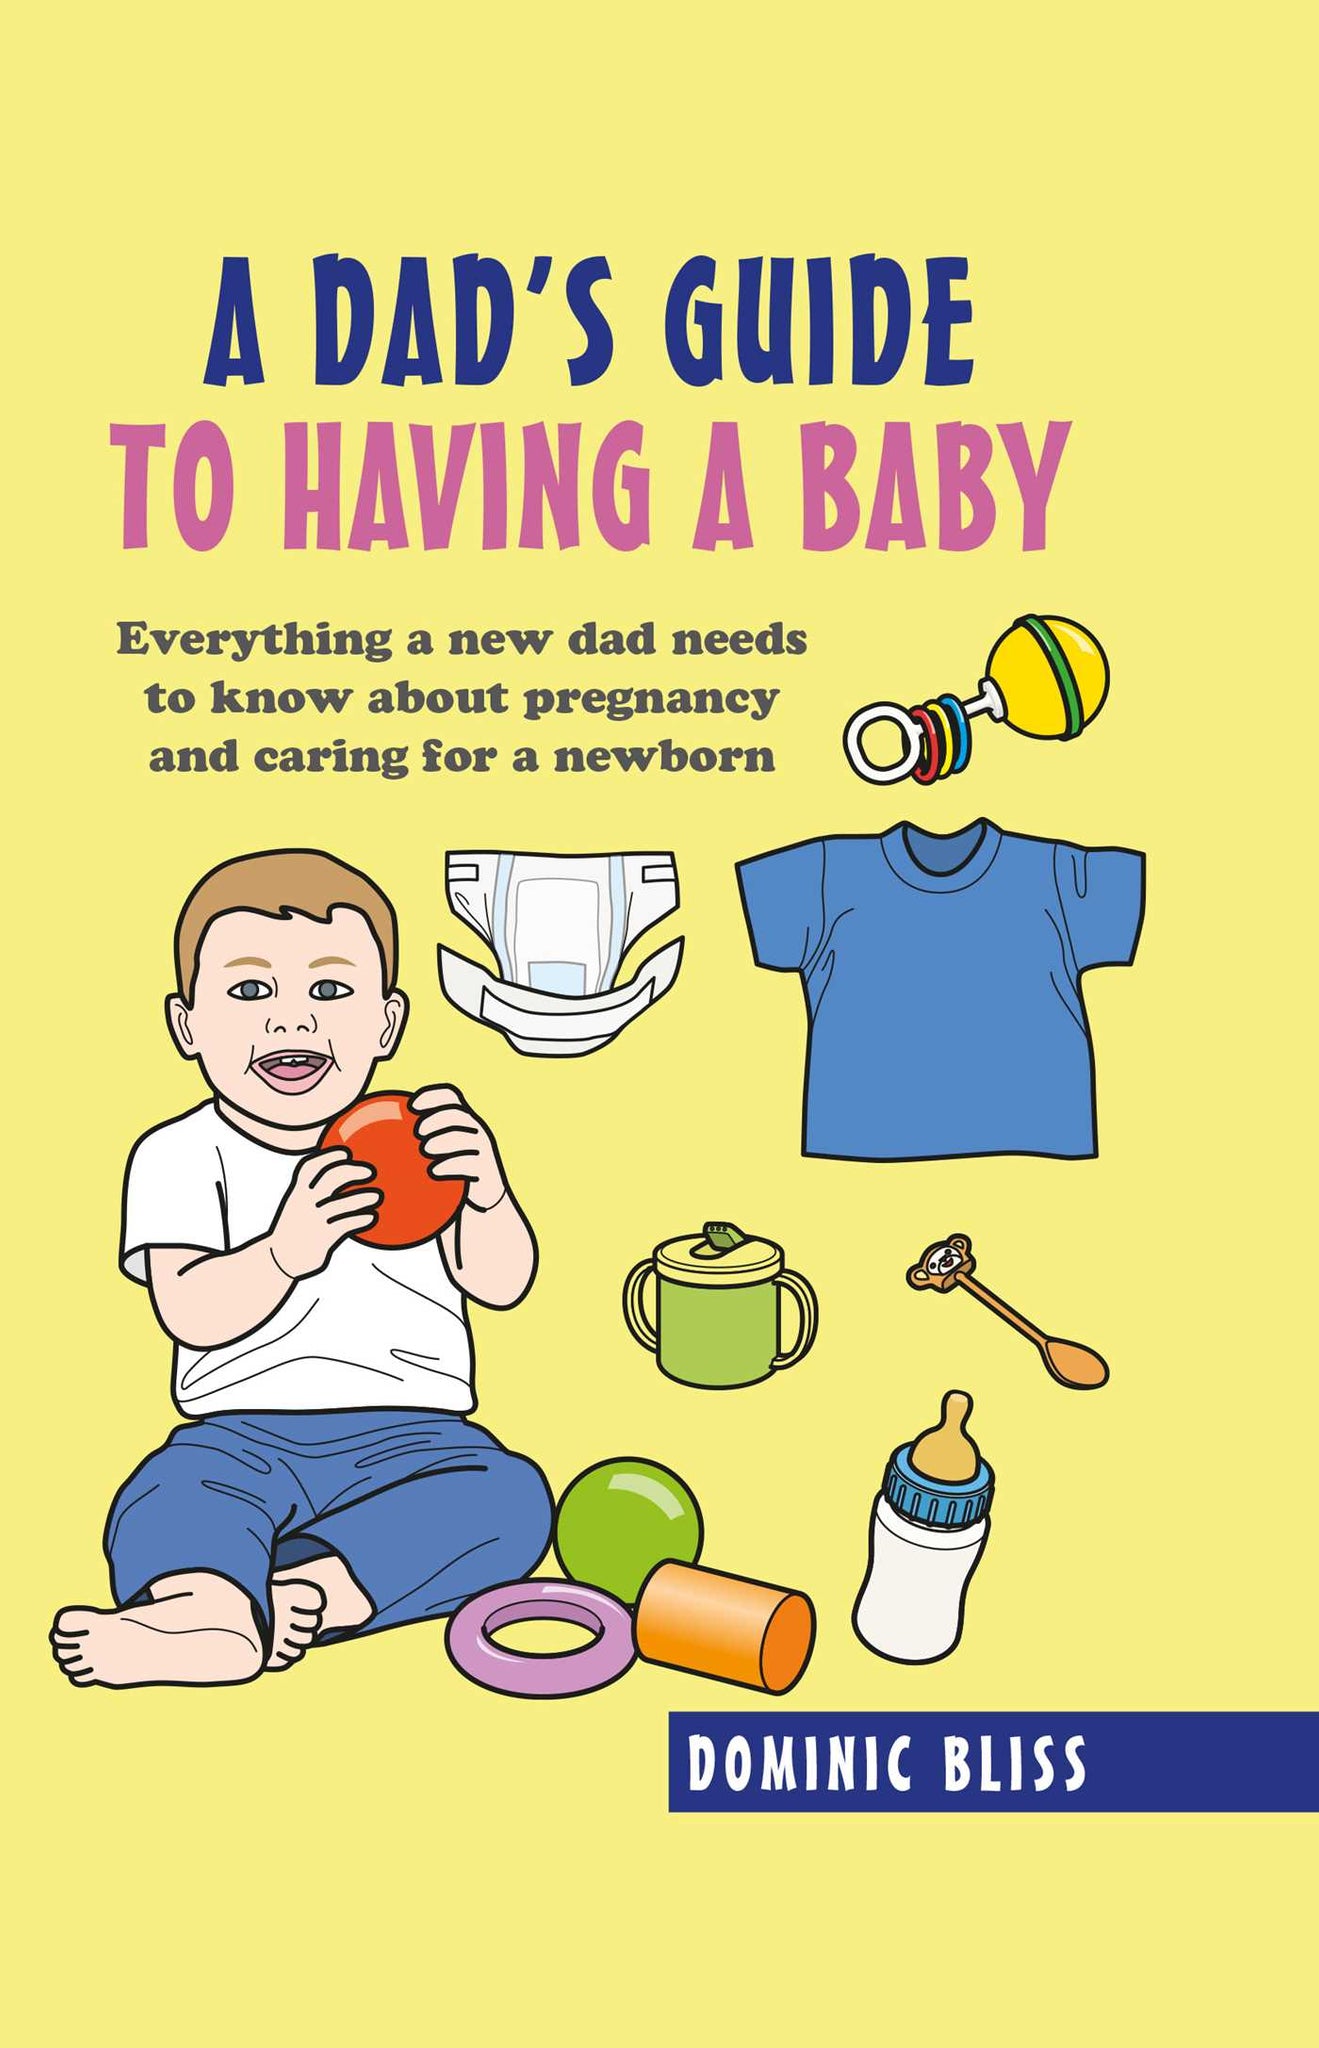 A Dad's Guide to Having a Baby : Everything a new dad needs to know about pregnancy and caring for a newborn